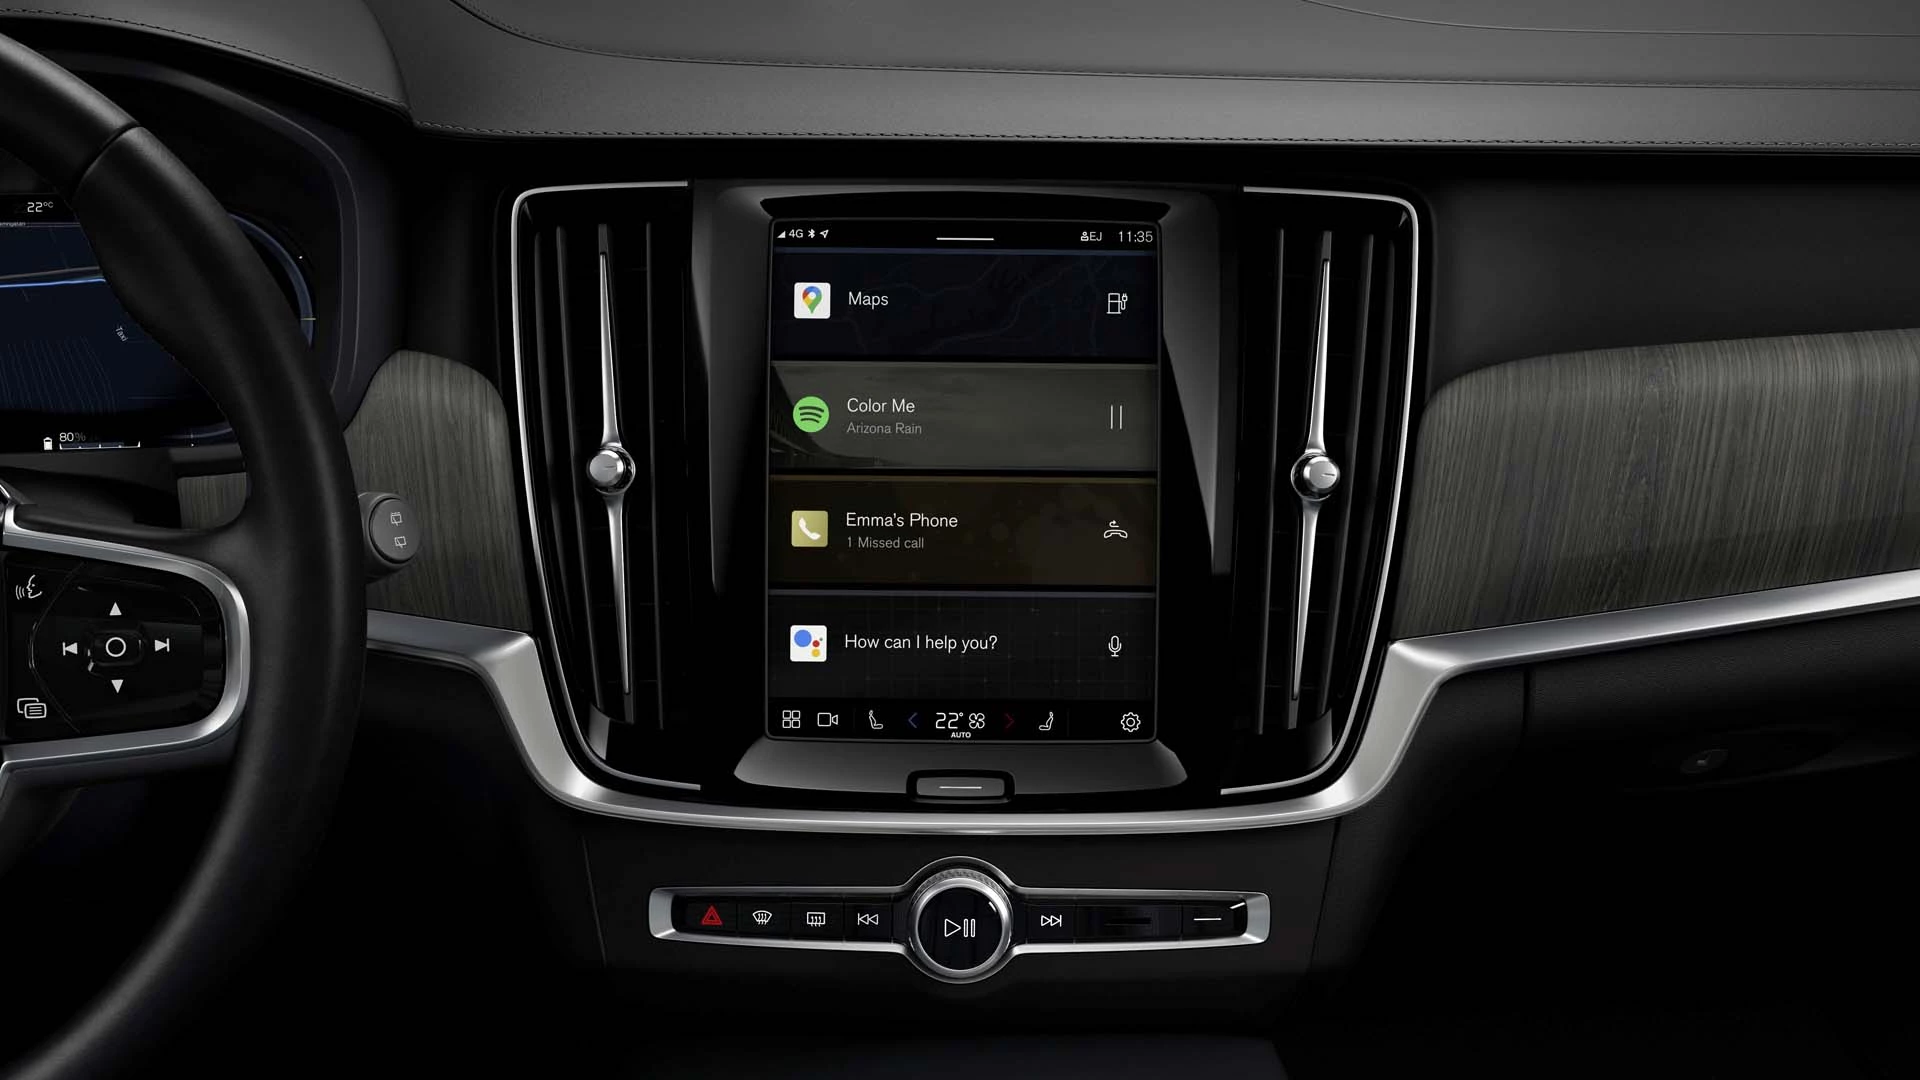 279246 Volvo Cars Brings Infotainment System With Google Built In To More Models